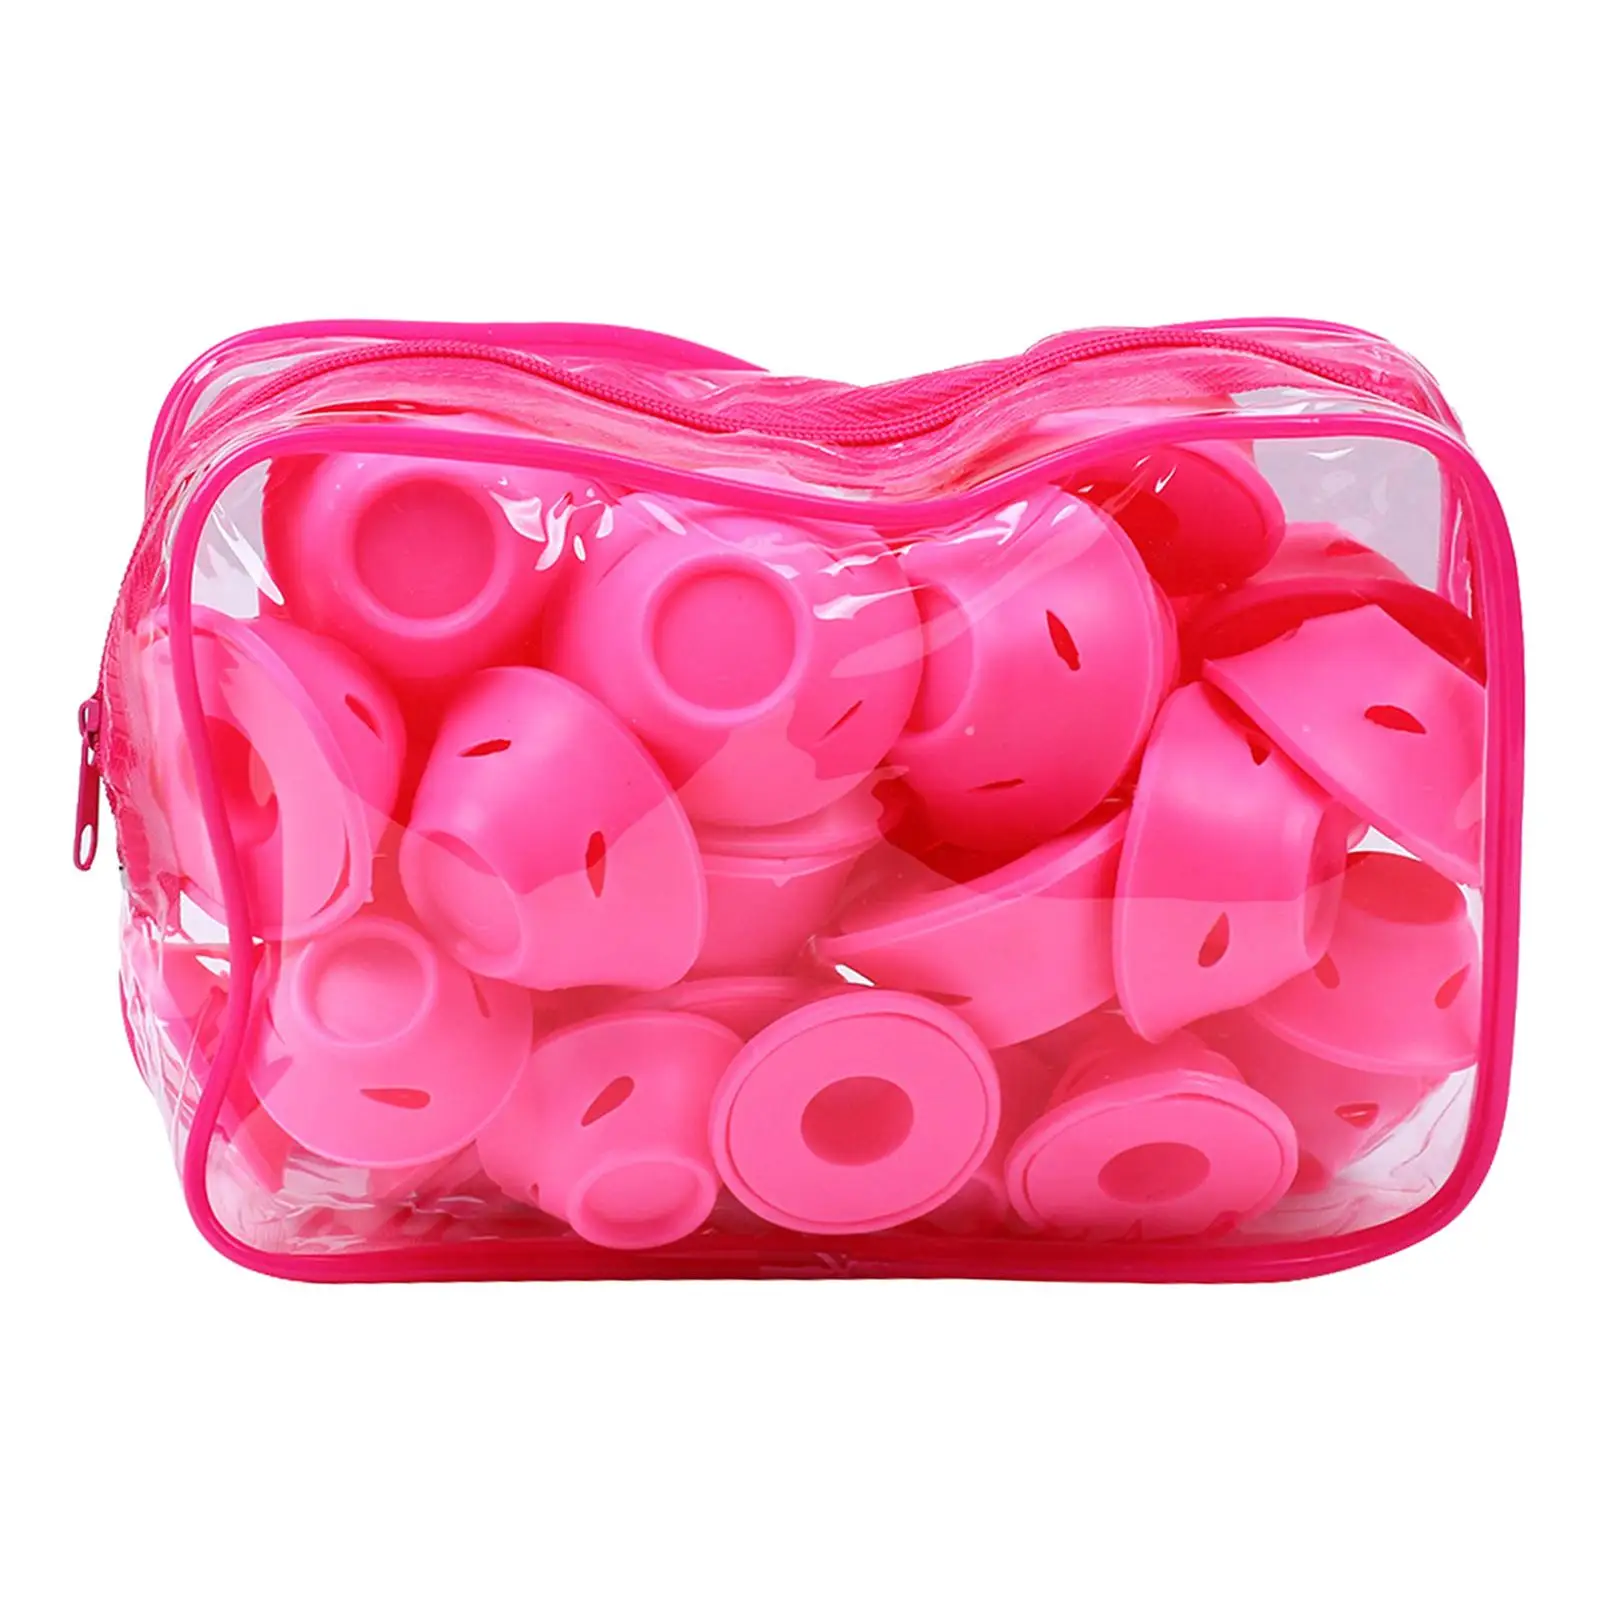 Set of 30 Hair Curler Non Heating Mushroom Shaped Silicone Removable Curls Tool